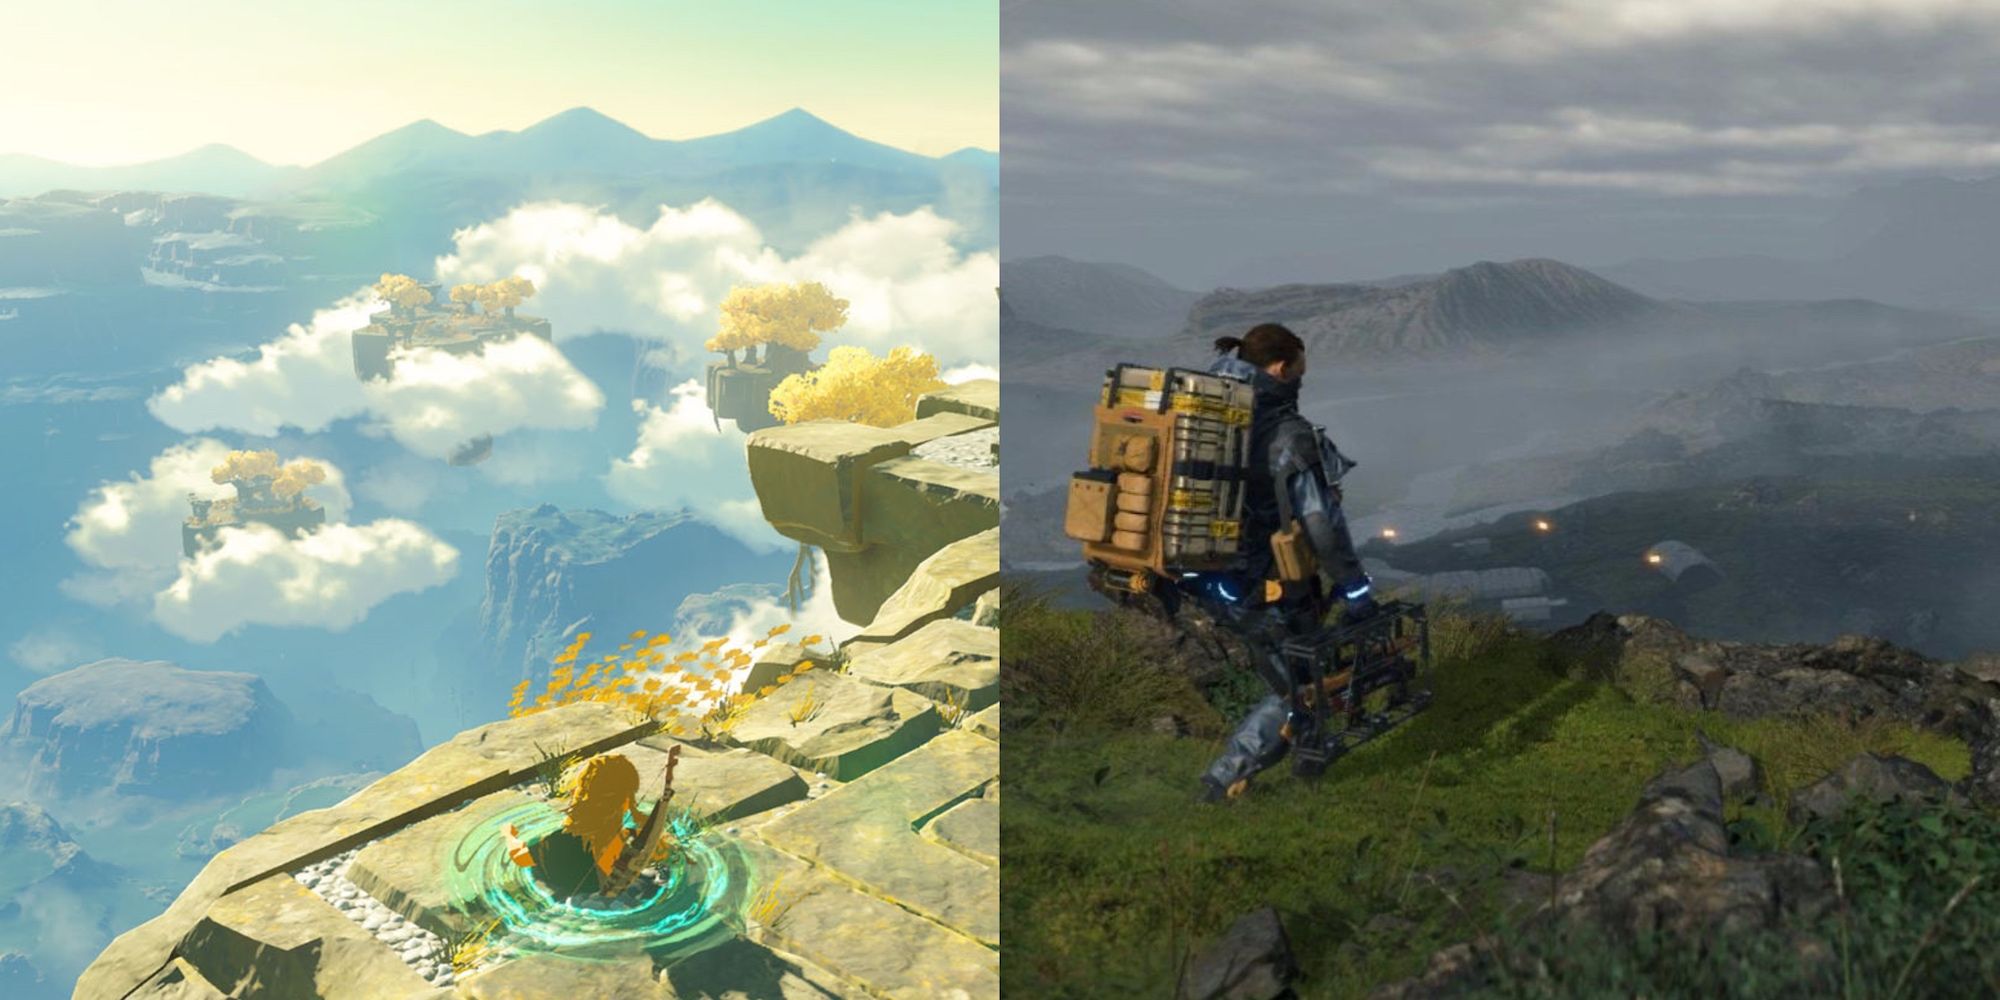 Tears of the kingdom on the left, Death Stranding on the right